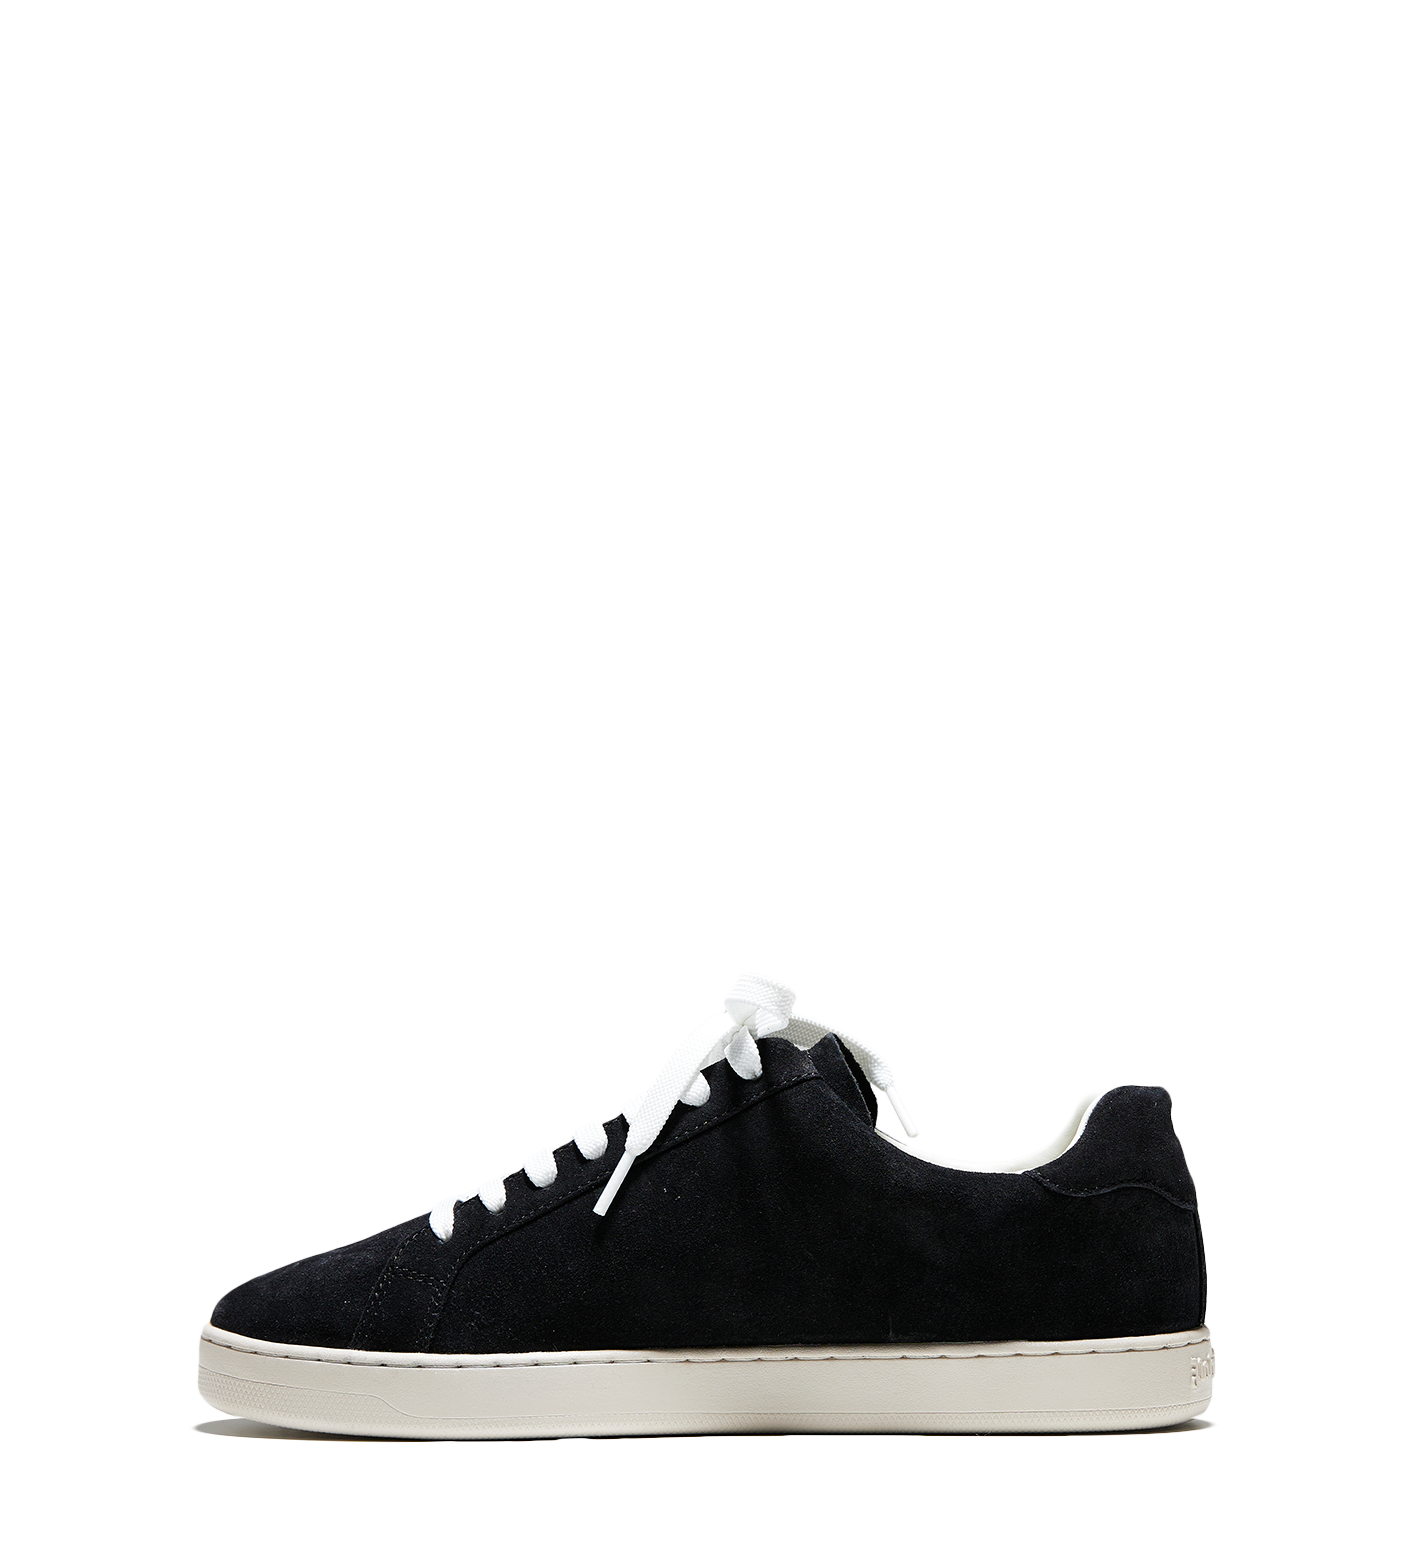 Palm One Suede Sneaker Black